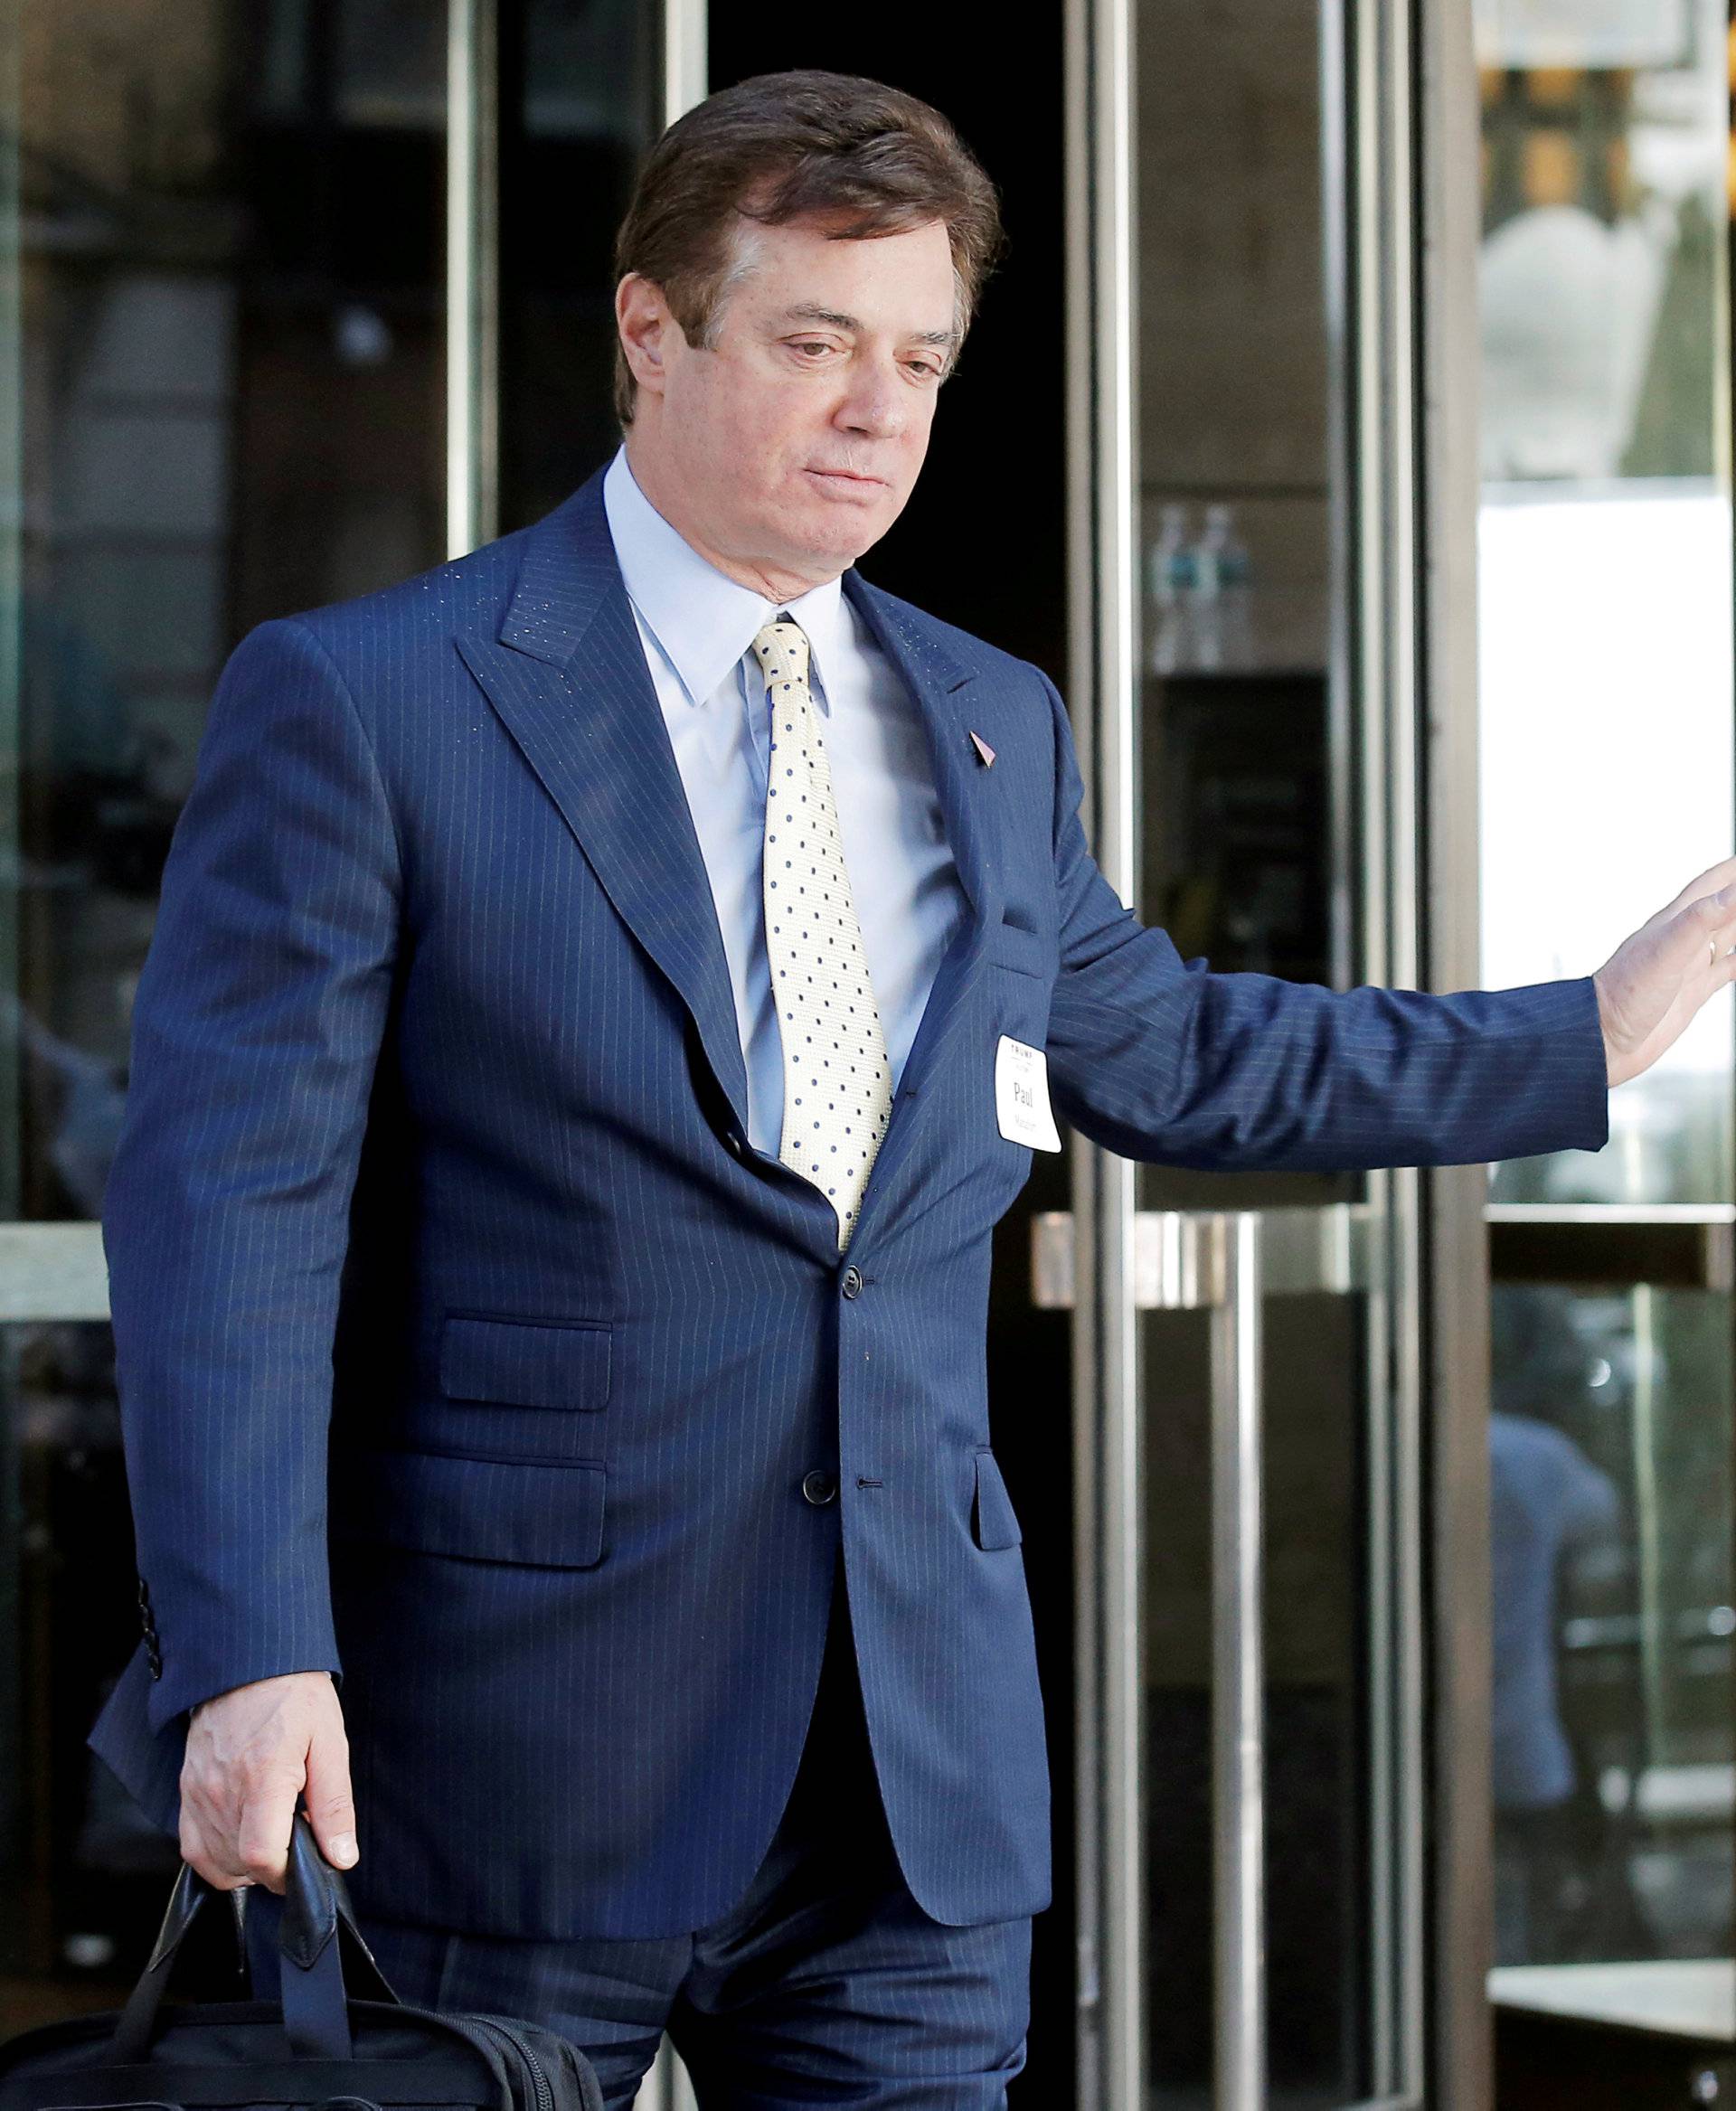 FILE PHOTO: Paul Manafort, senior advisor to Republican U.S. presidential candidate Donald Trump, exits following a meeting of Donald Trump's national finance team in New York